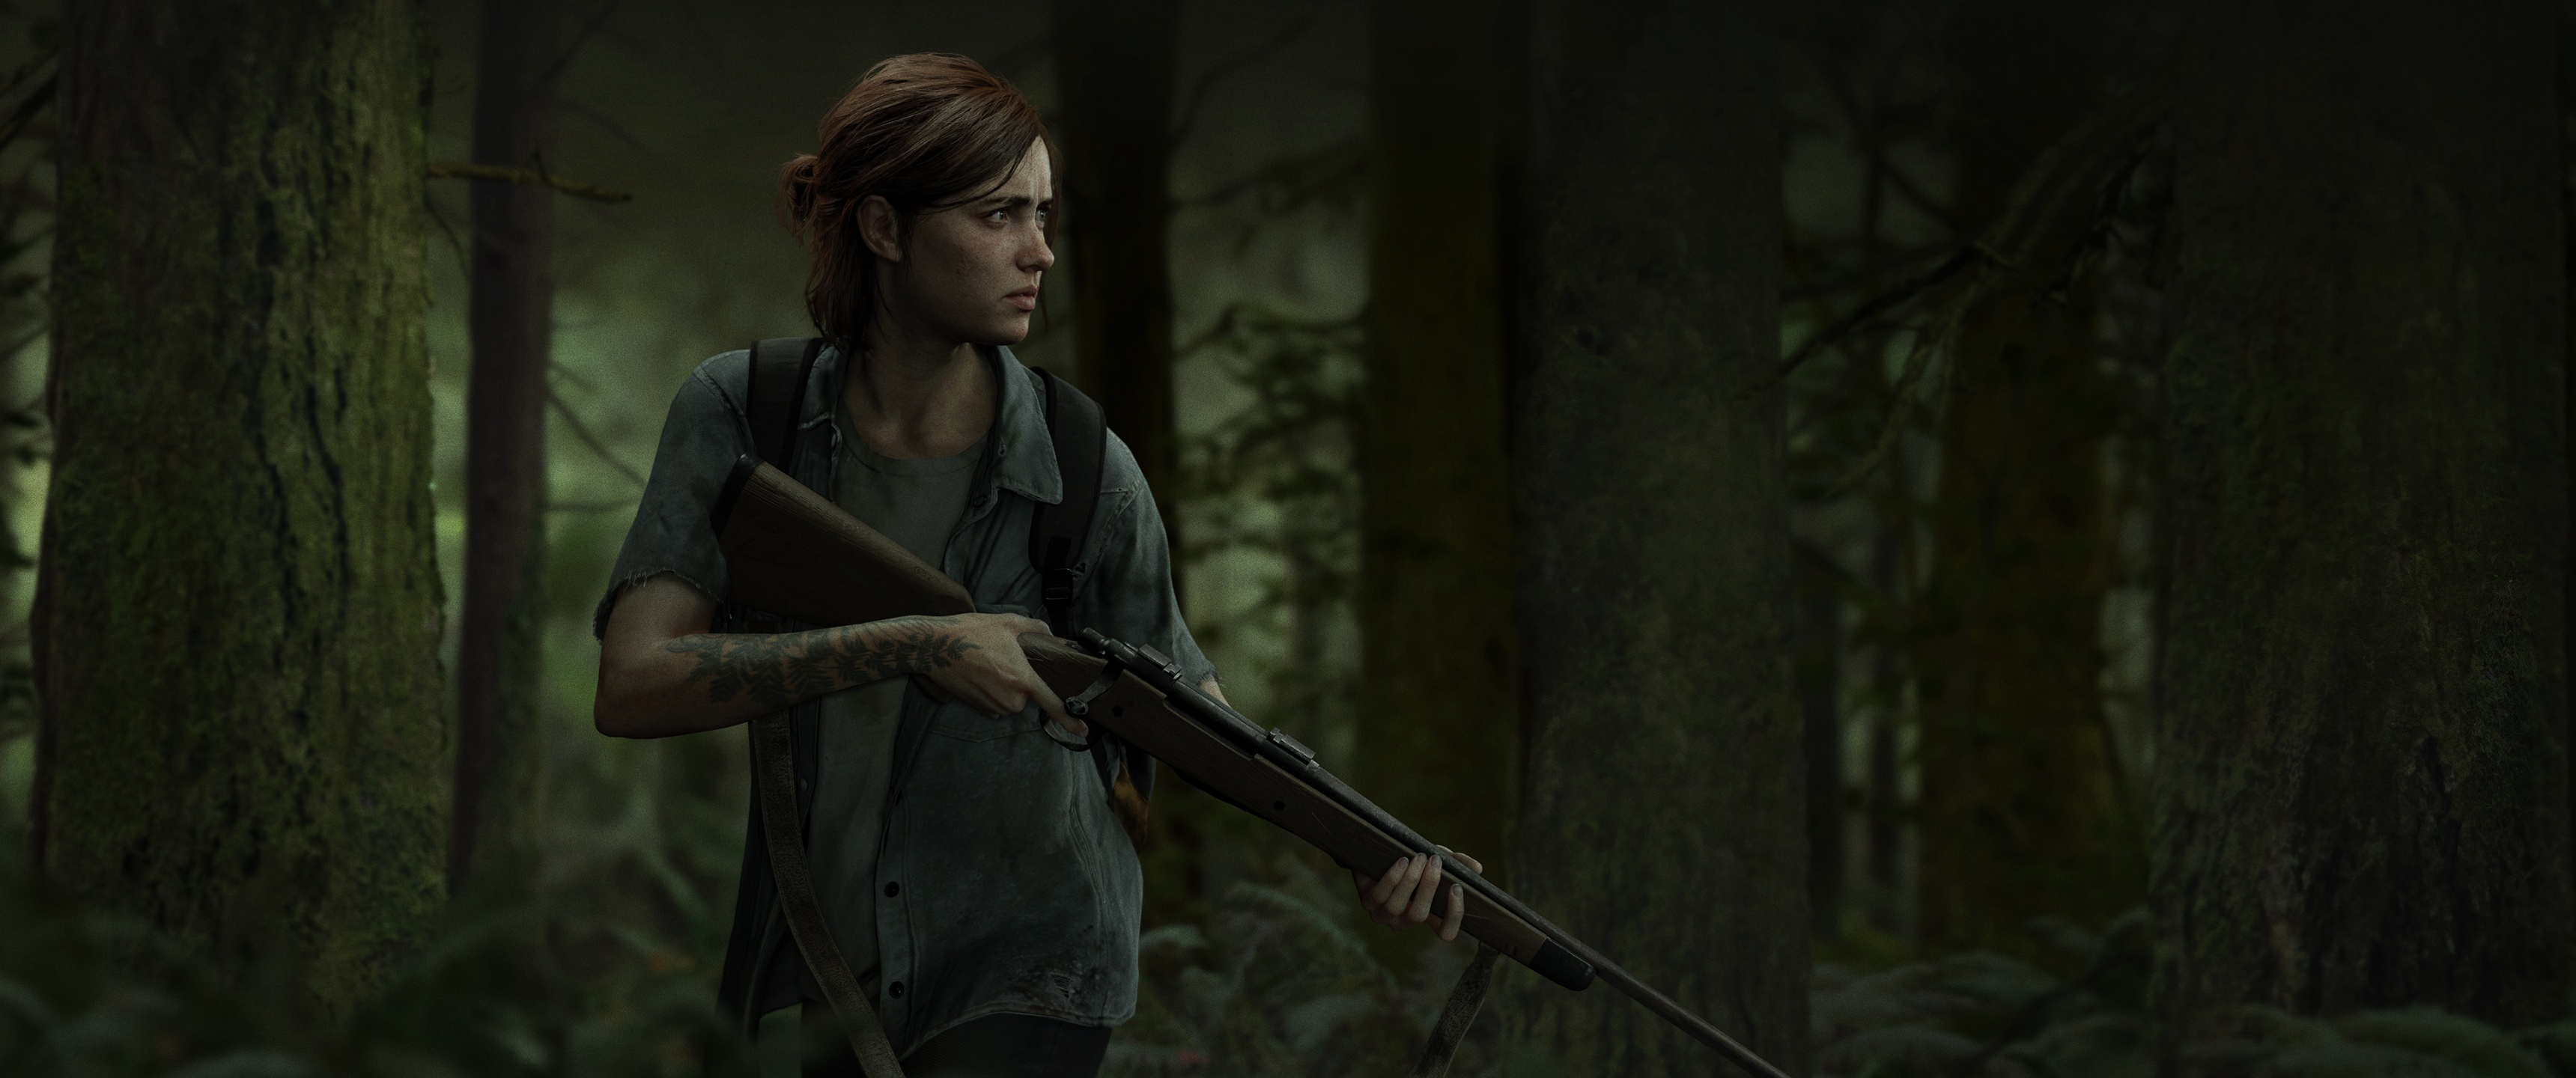 Wallpaper ID 1491254  The Last of Us 2 video games Ellie video game  characters plants nature trees 1080P free download